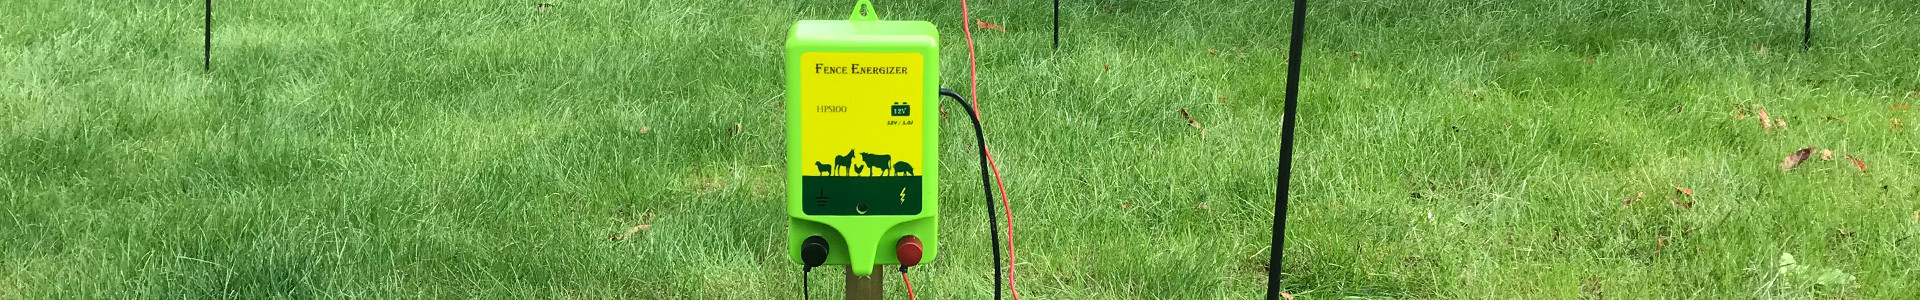 hps fence AC-Powered Electric Fence Energizer